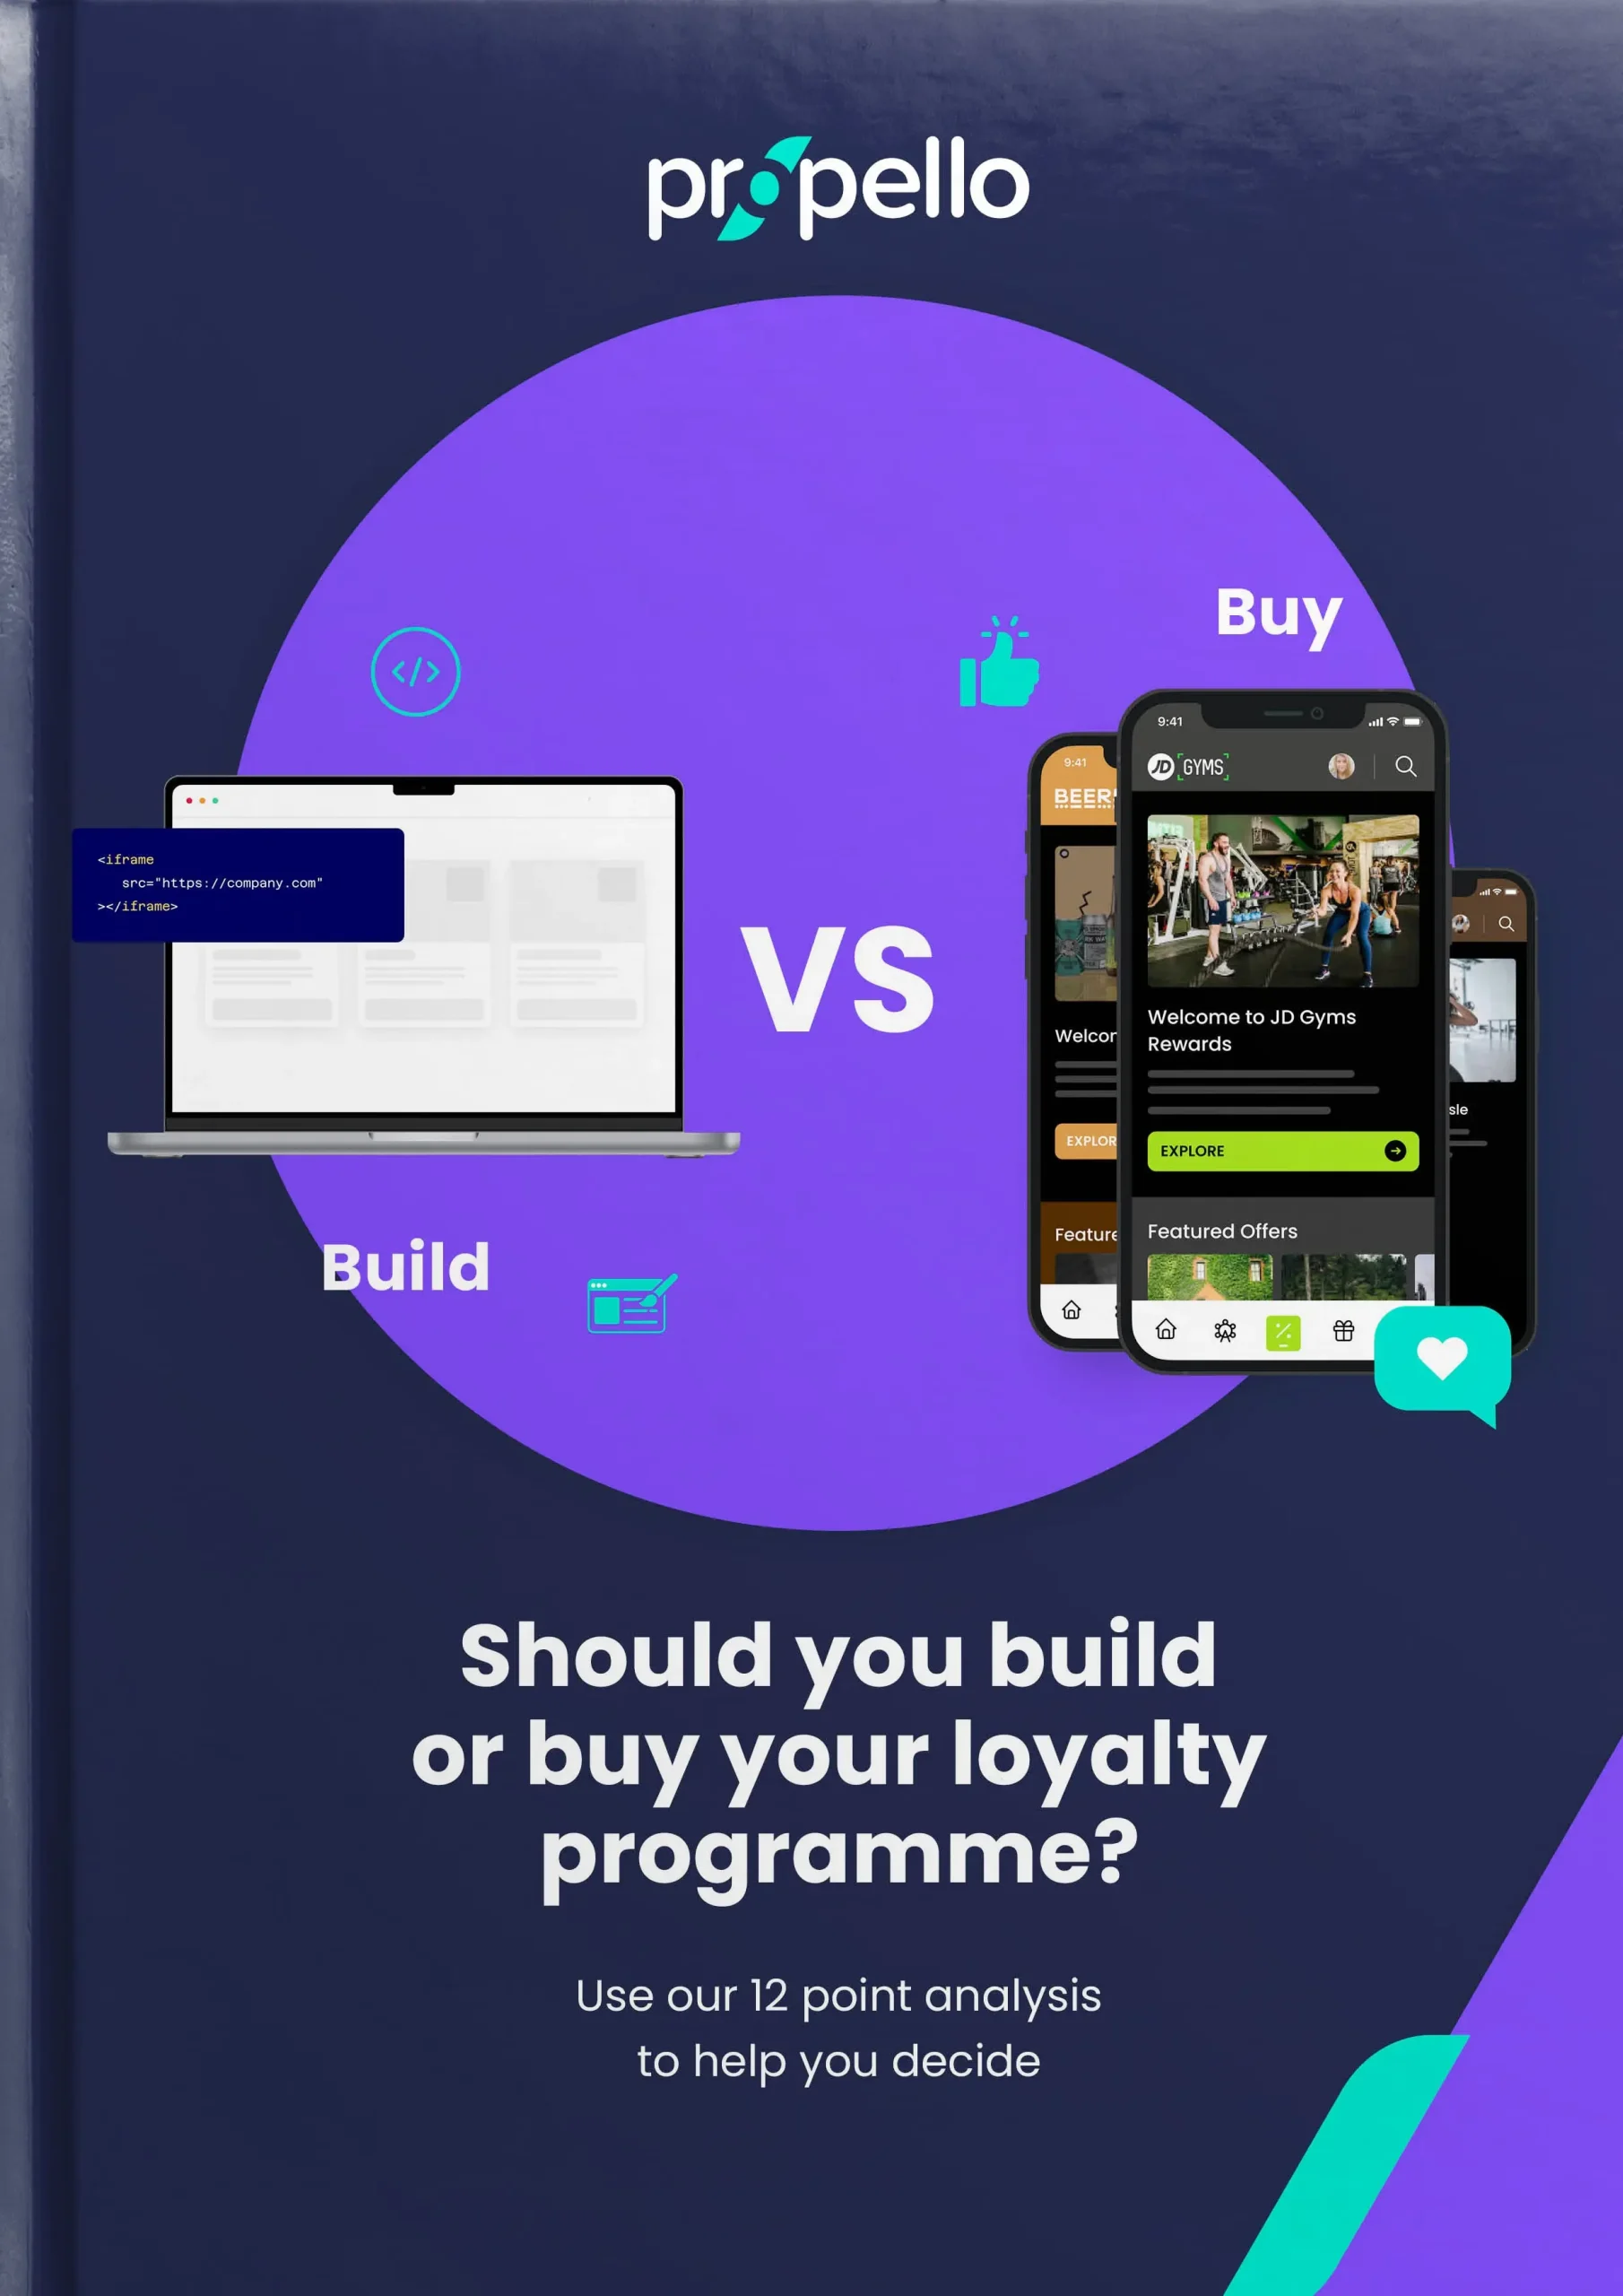 Should You Build or Buy Your Loyalty Programme?